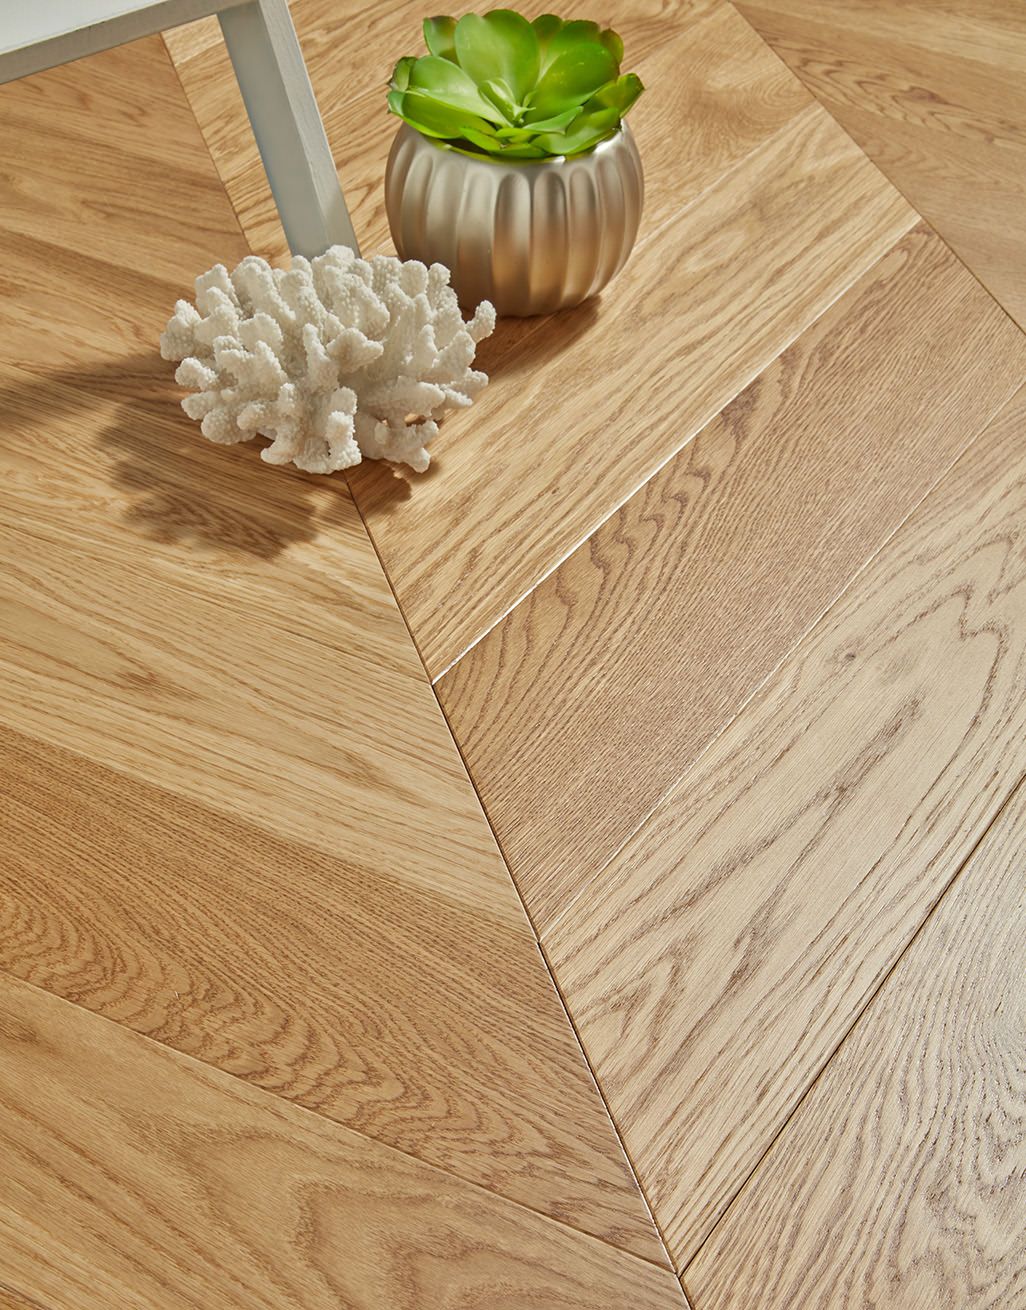 Chelsea Chevron - Natural Oak Brushed & Lacquered Engineered Wood Flooring 2